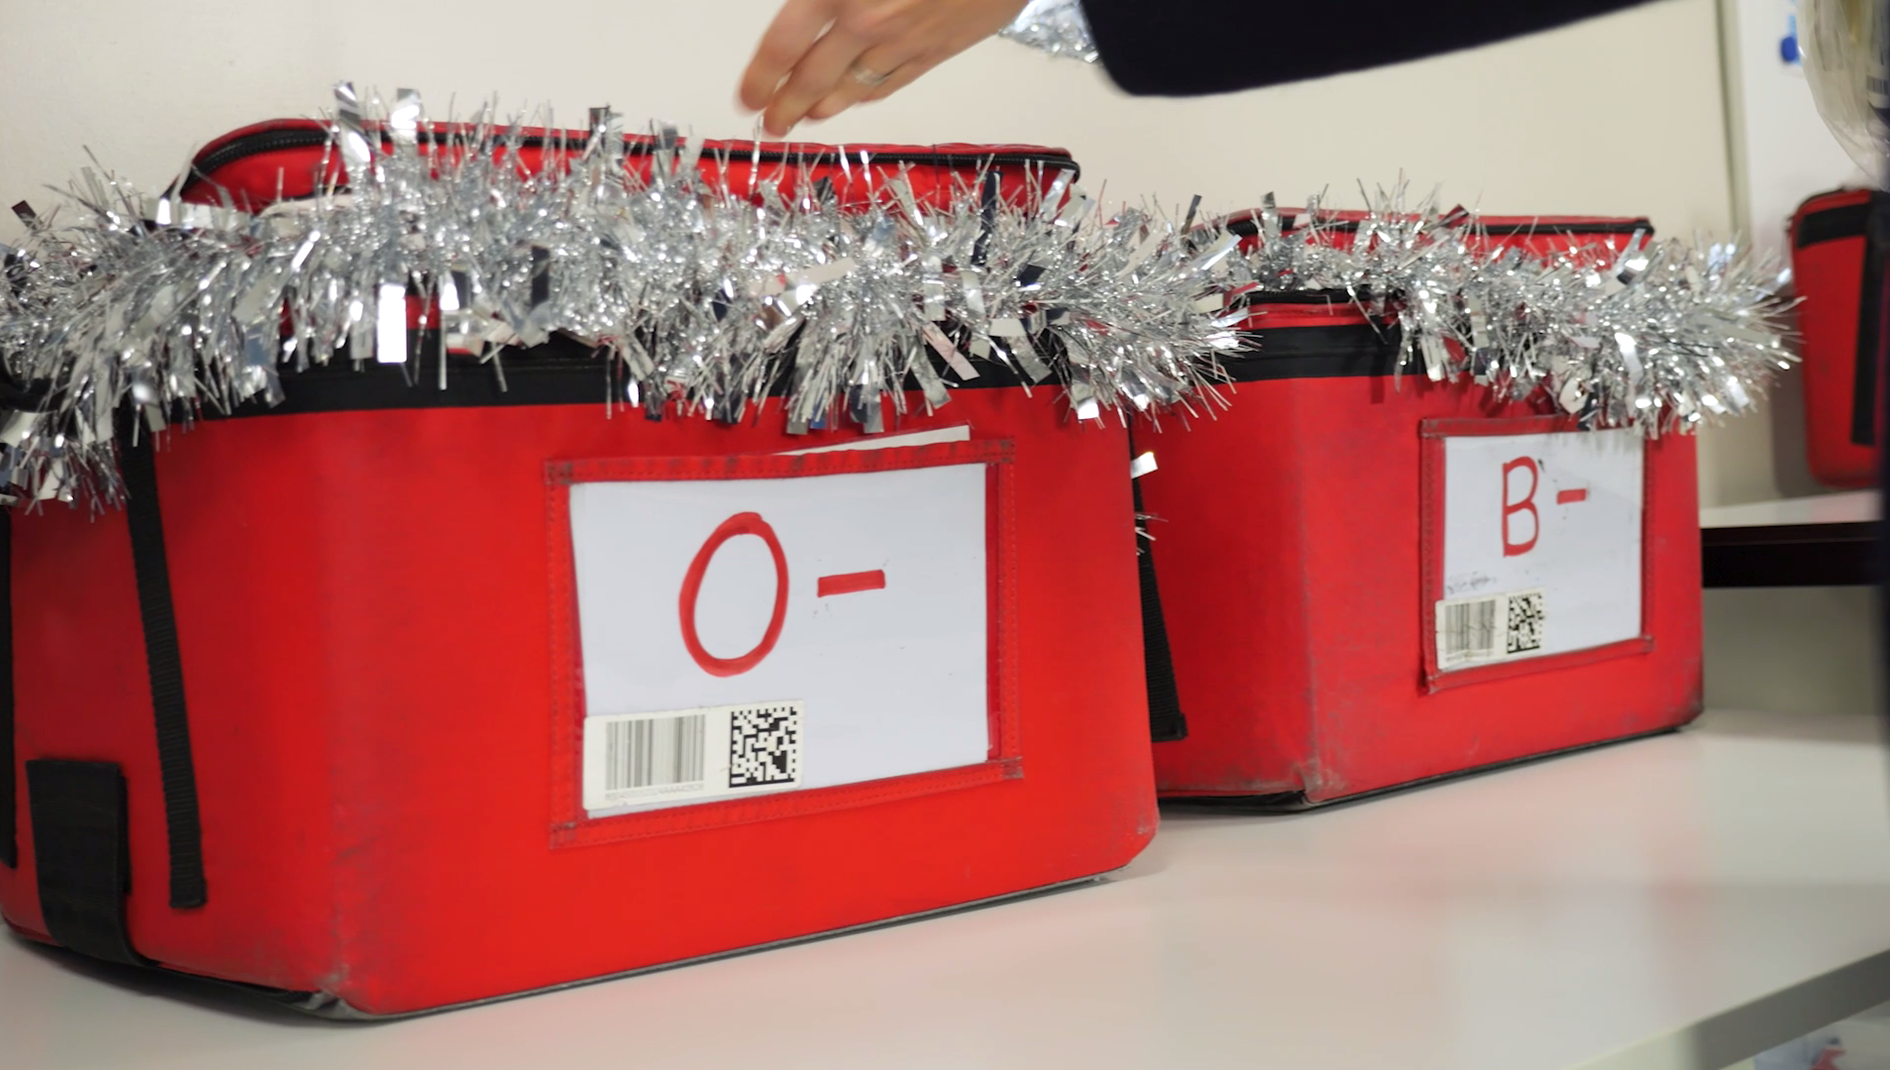 O negative and B negative blood boxes with festive trim